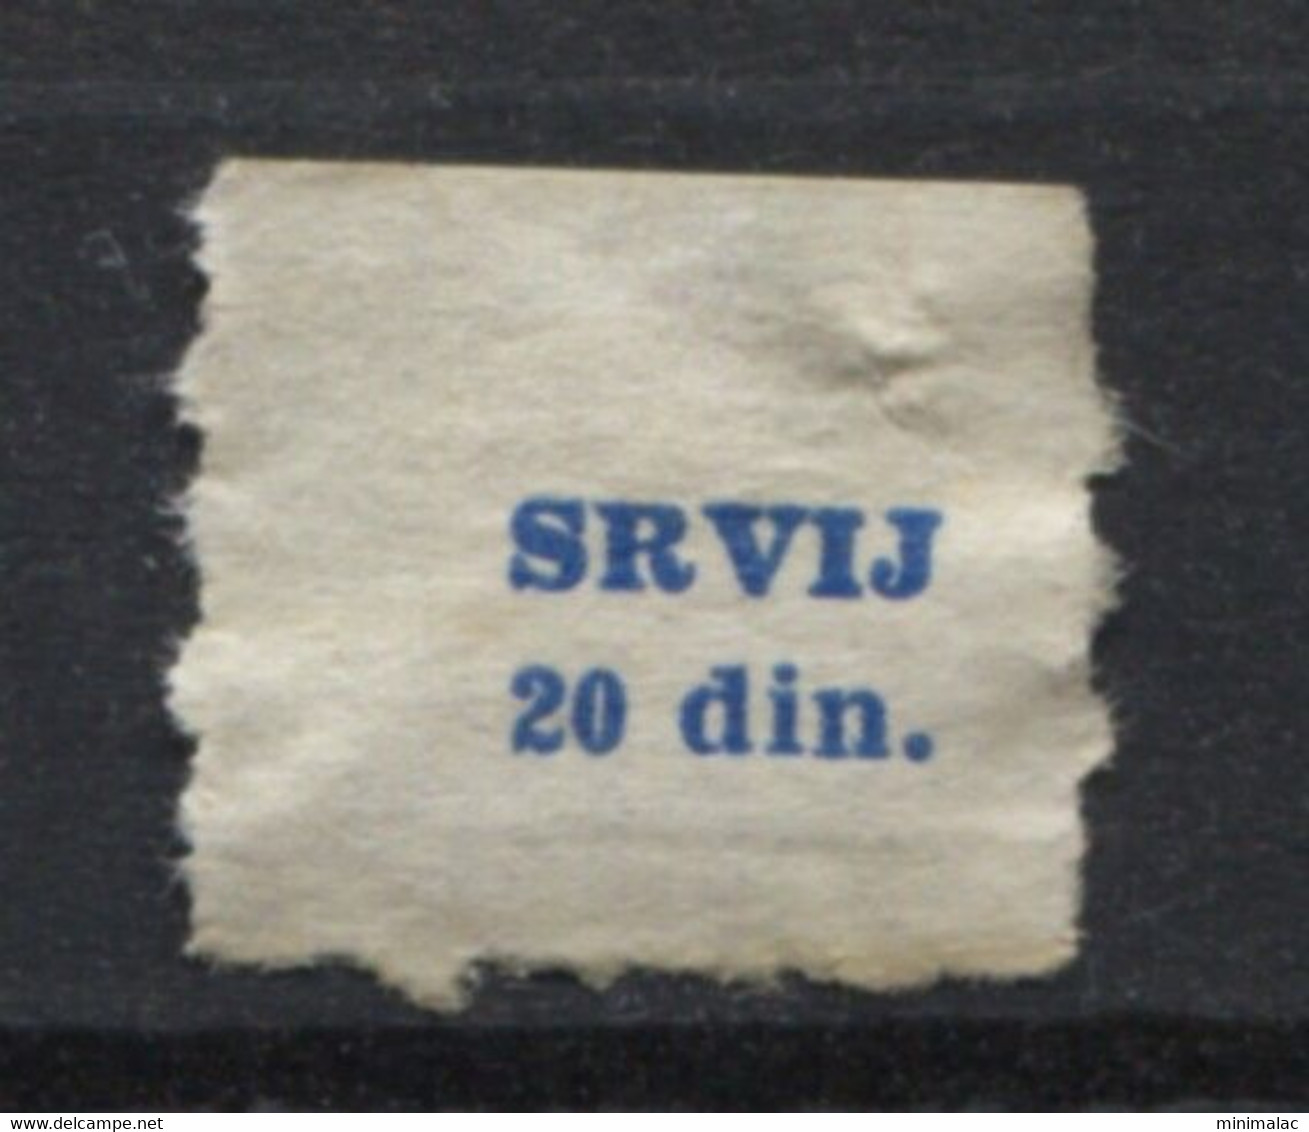 Yugoslavia 1961, Stamp For Membership, SRVIJ, Labor Union, Administrative Stamp - Revenue, Tax Stamp, 20d LATIN LETTERS - Officials